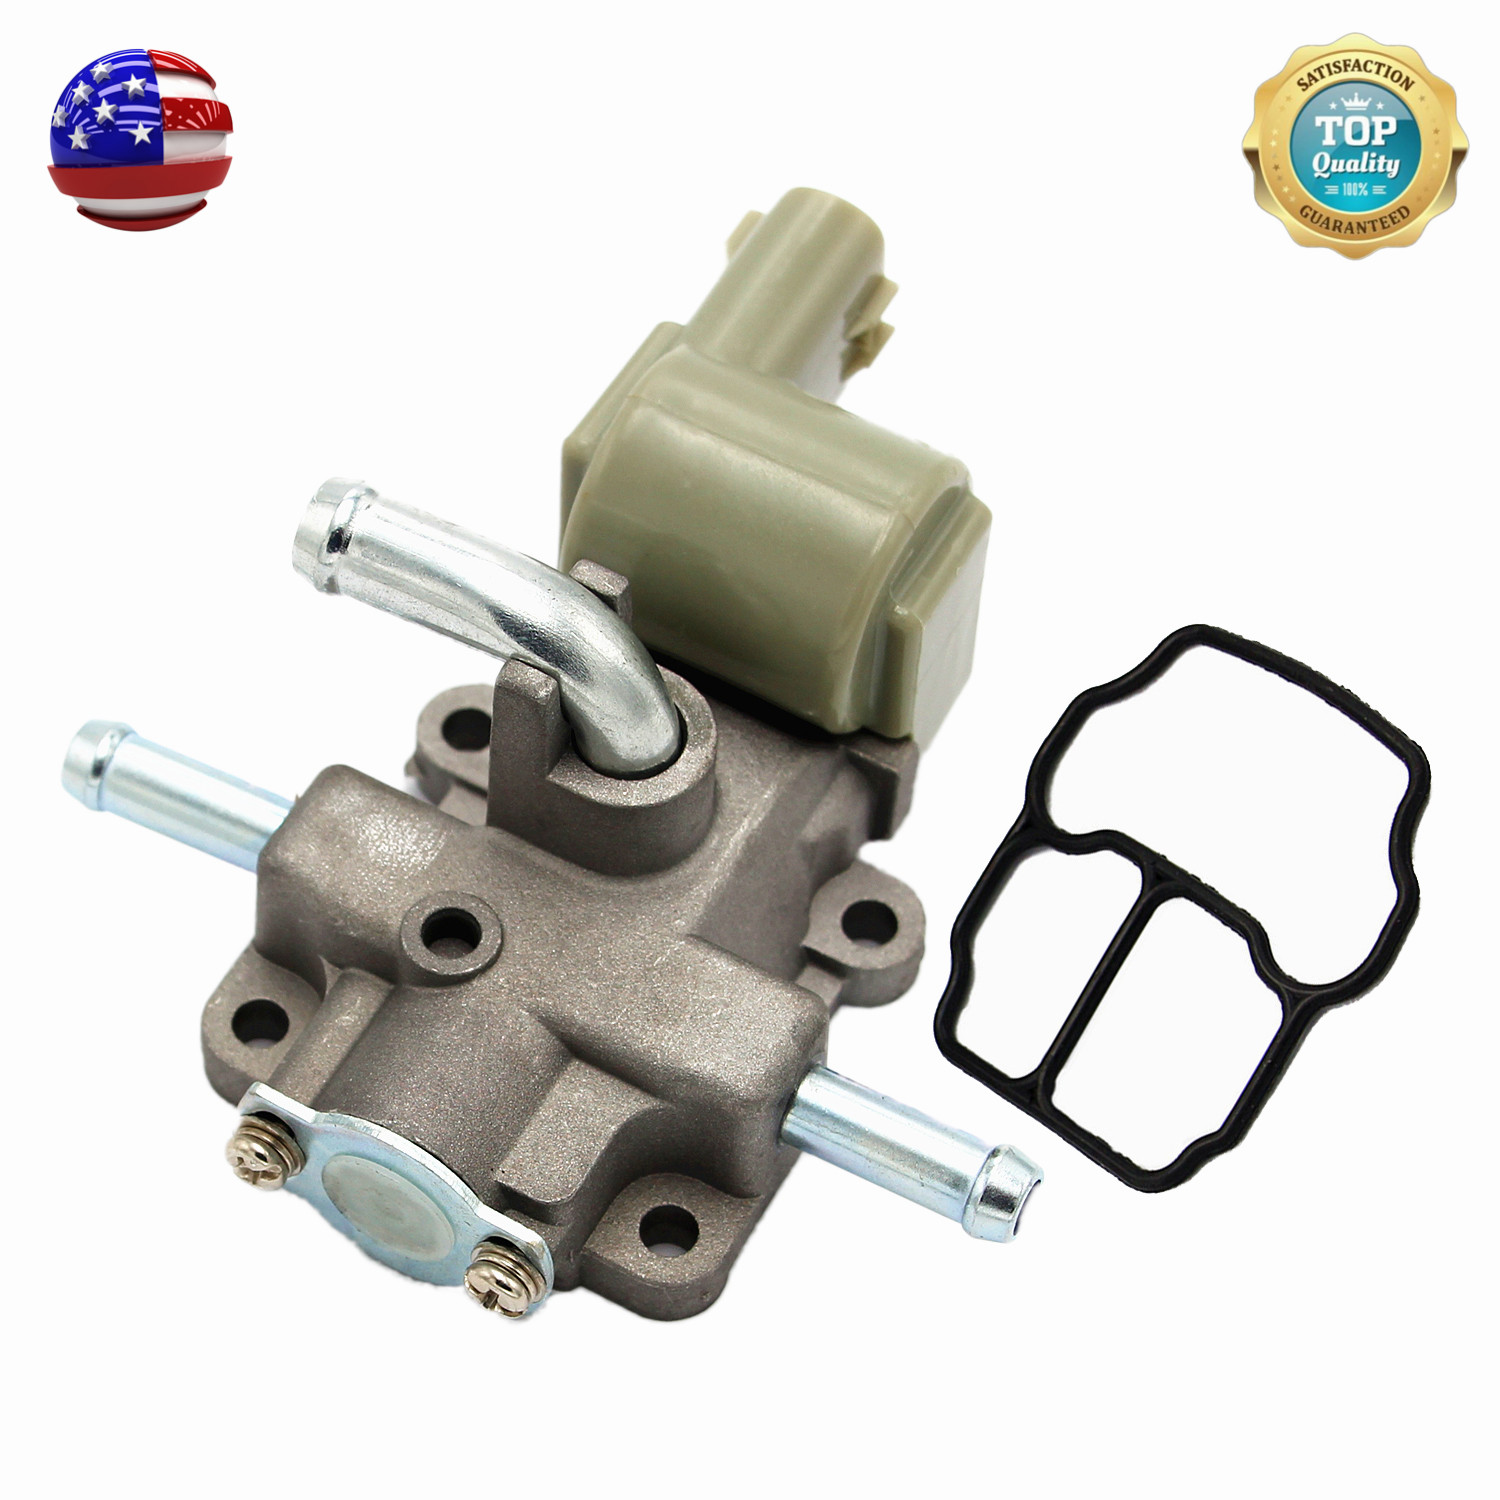 Idle Air Control Valve for Toyota Tundra T100 Tacoma 4Runner 3.4L 22270